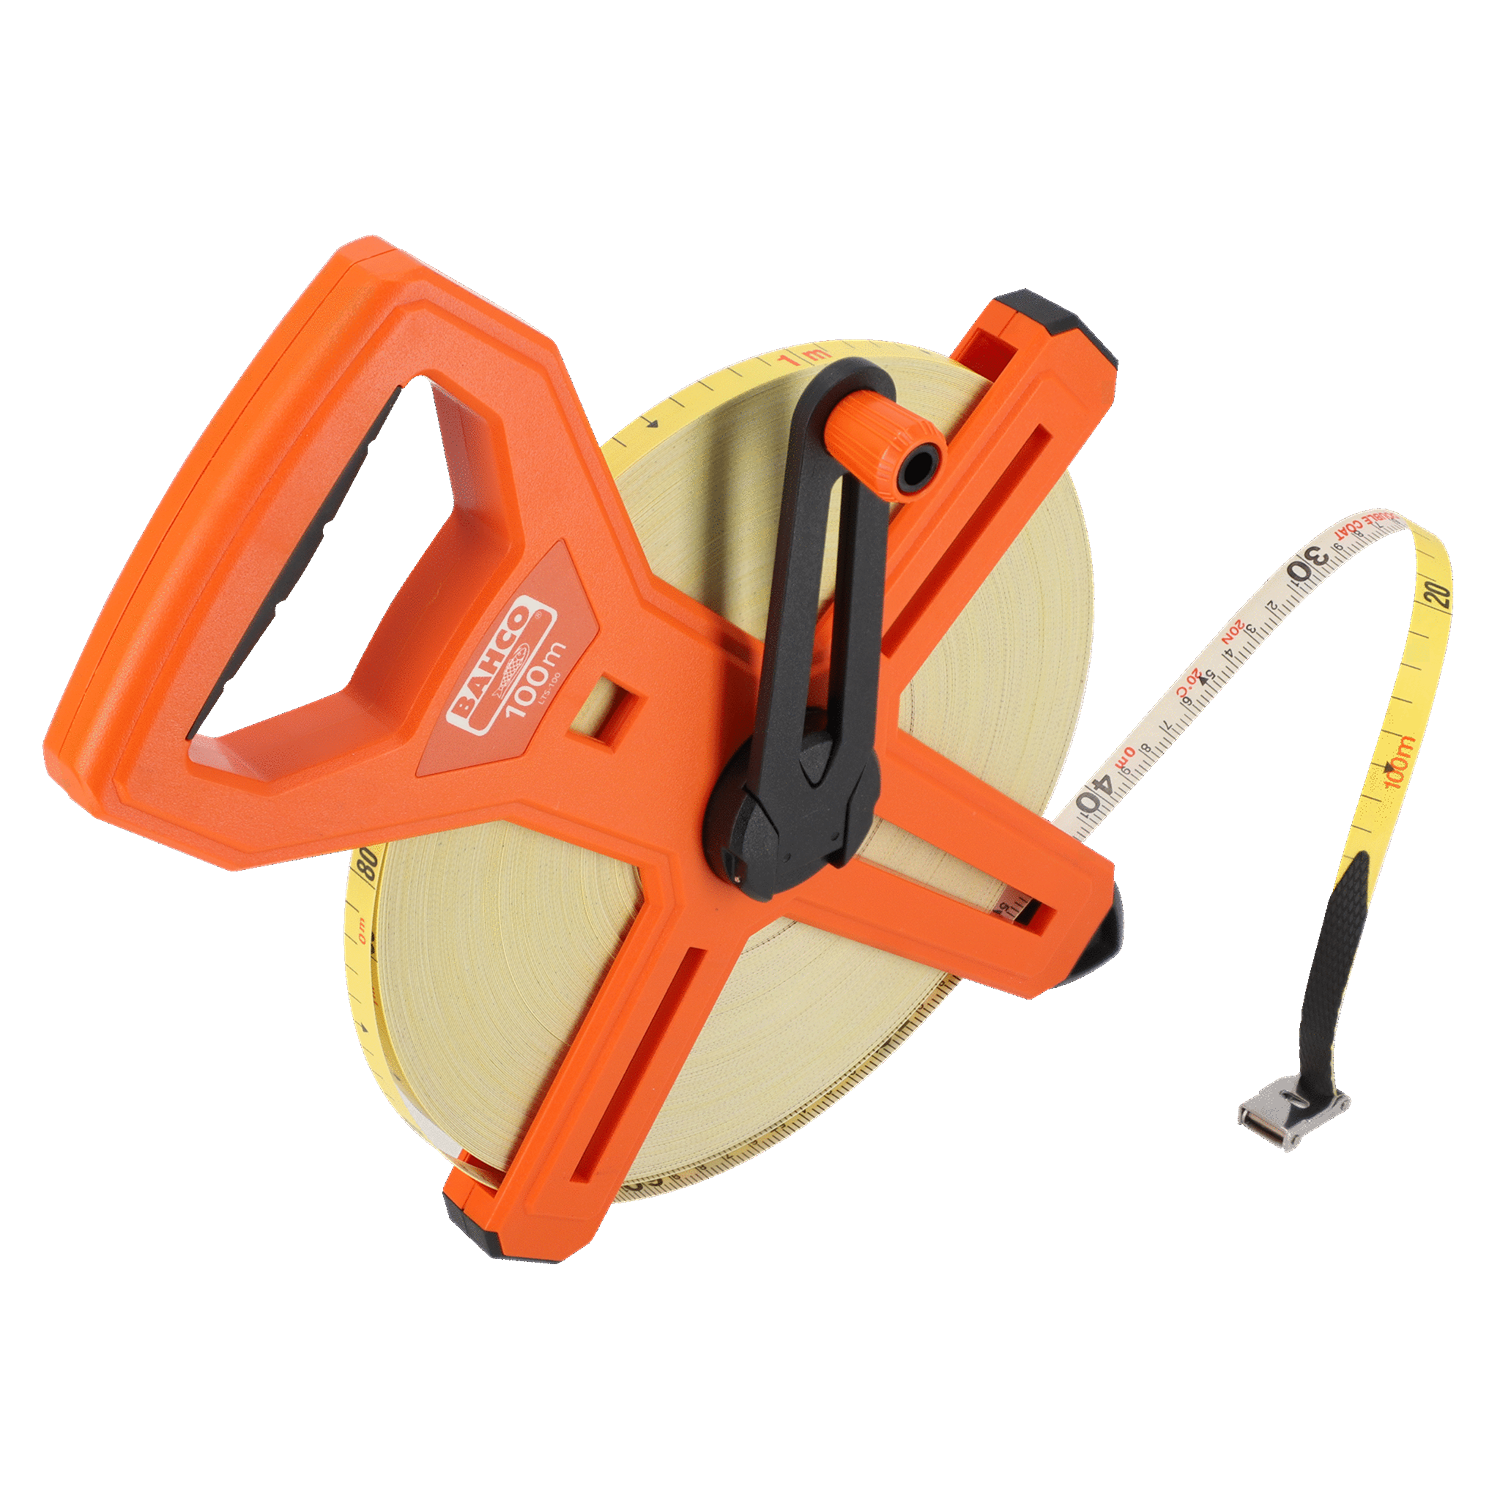 BAHCO LTS Long Measuring Tape with Steel Blade and Open Case - Premium Measuring Tape from BAHCO - Shop now at Yew Aik.